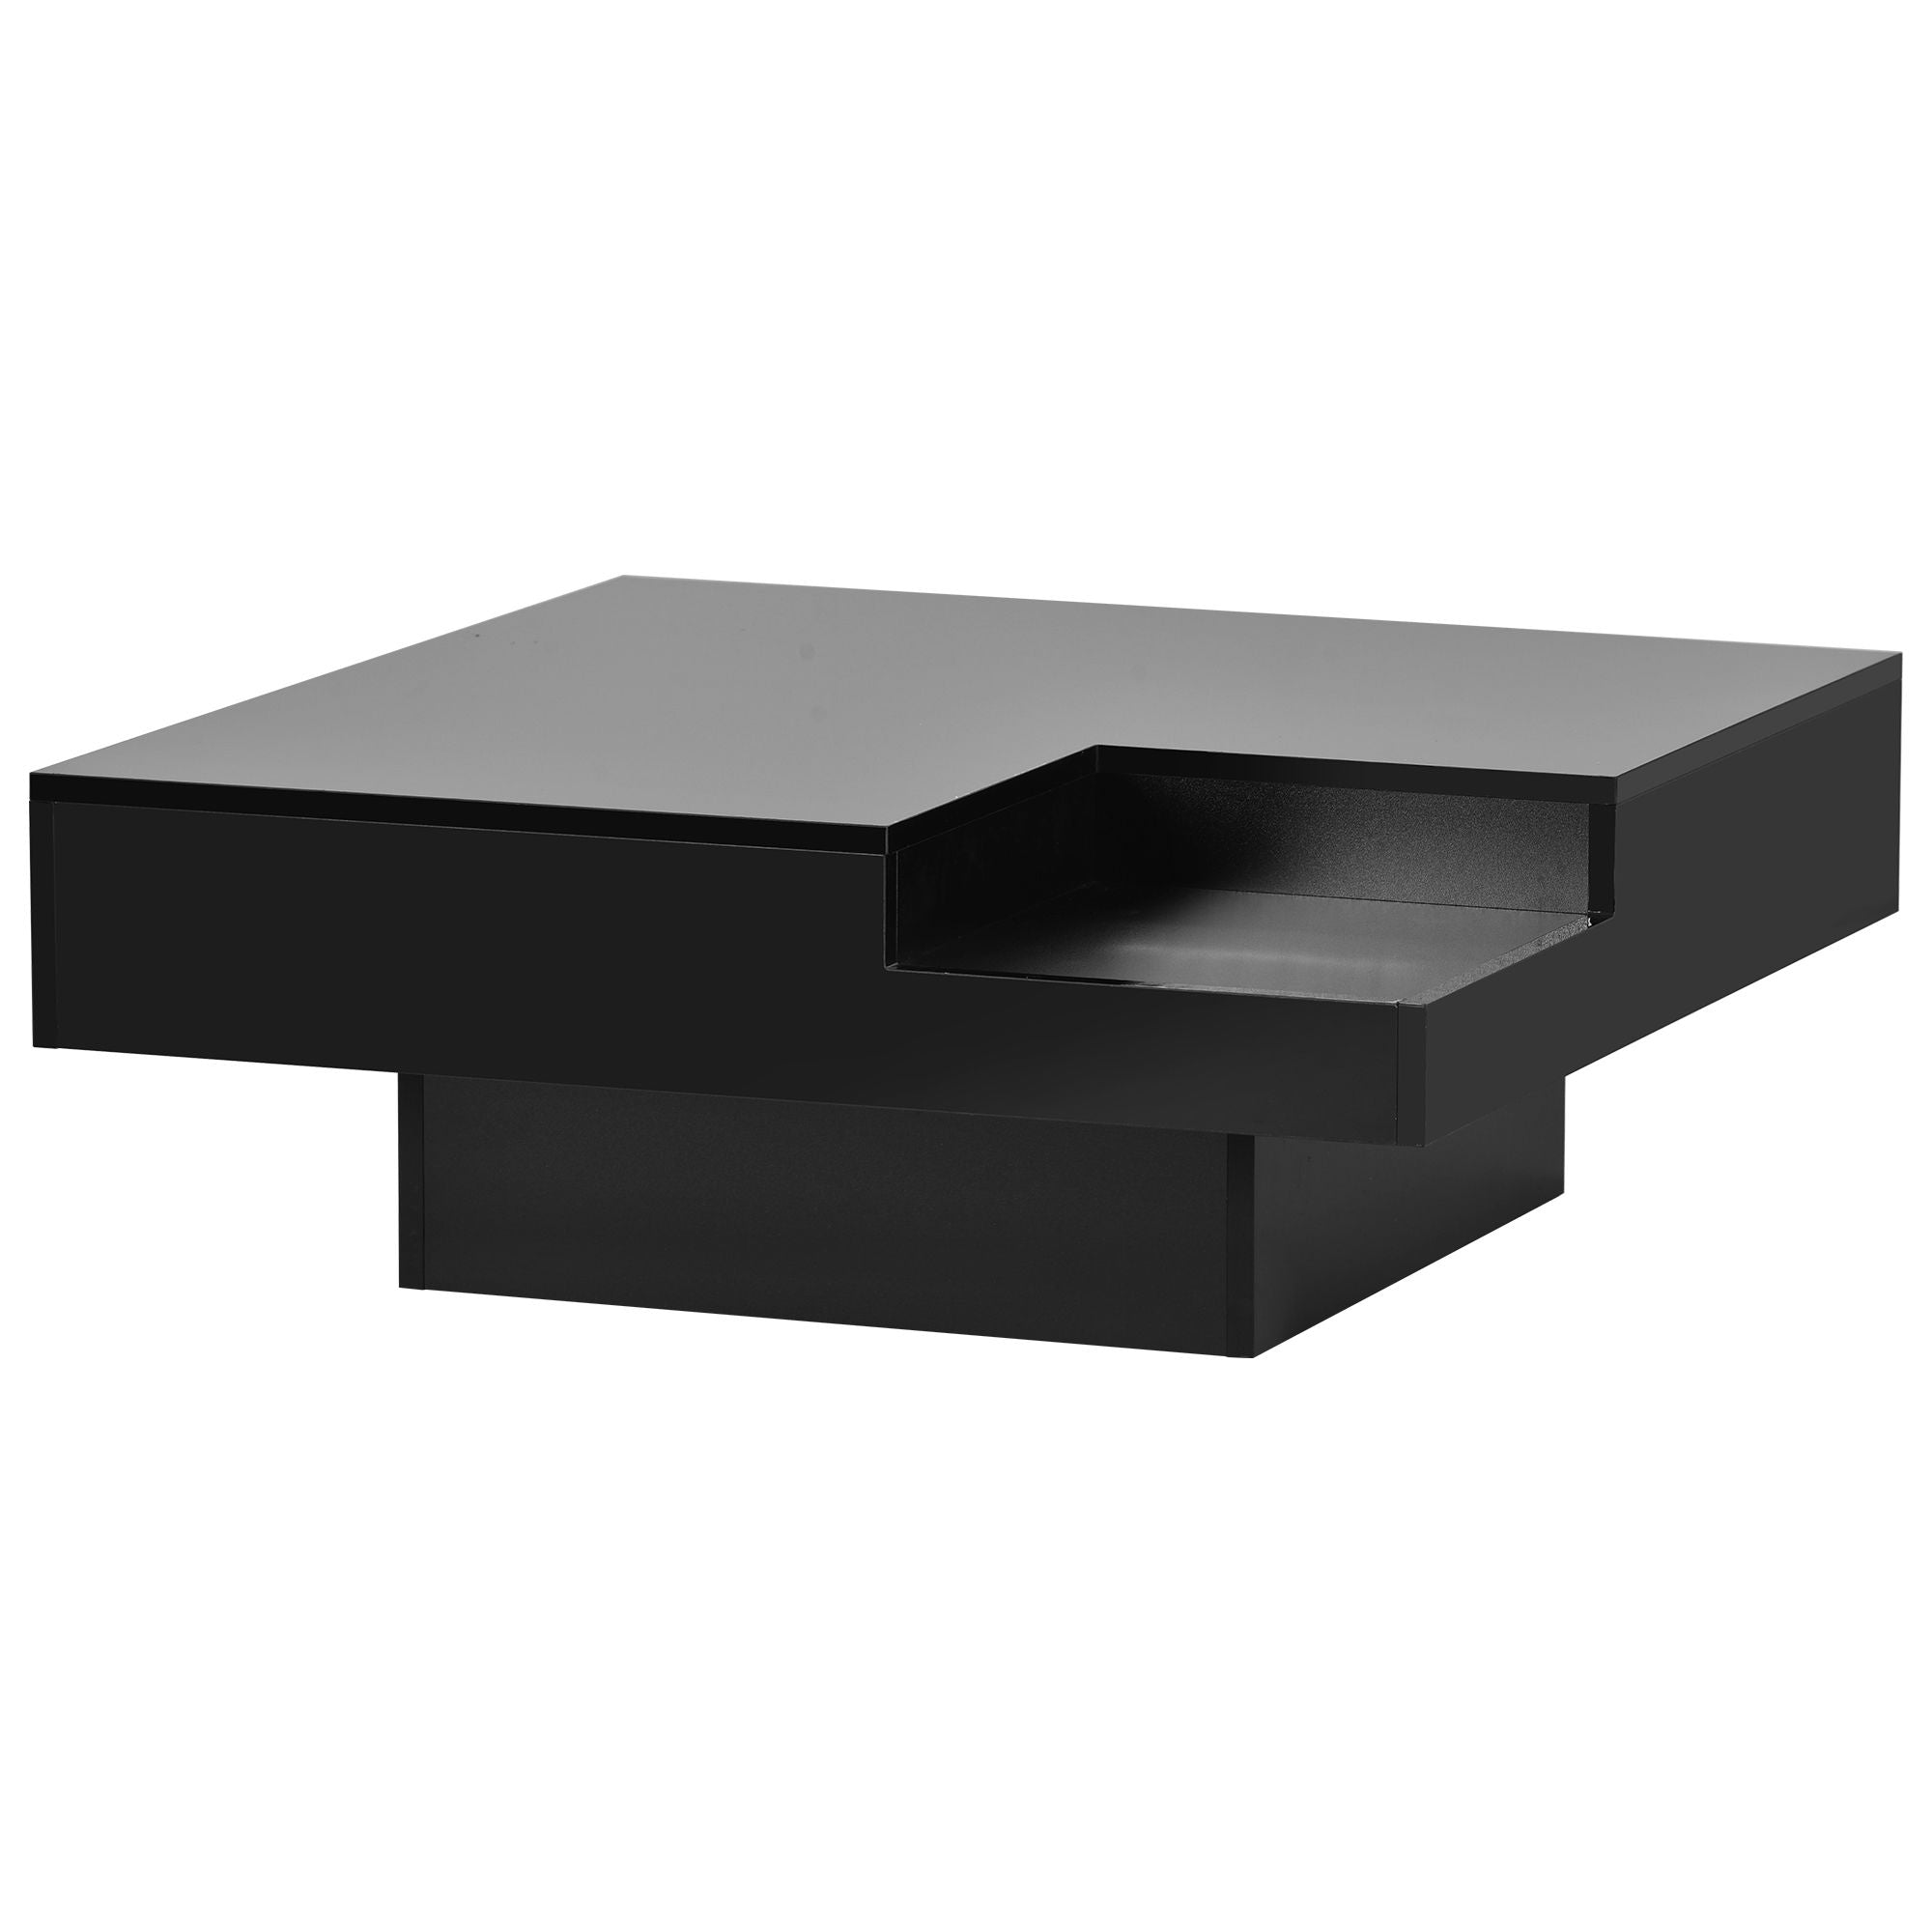 On-Trend Modern Minimalist Design 31.5*31.5 In Square Coffee Table With Detachable Tray And Plug-In 16-Color Led Strip Lights Remote Control For Living Room